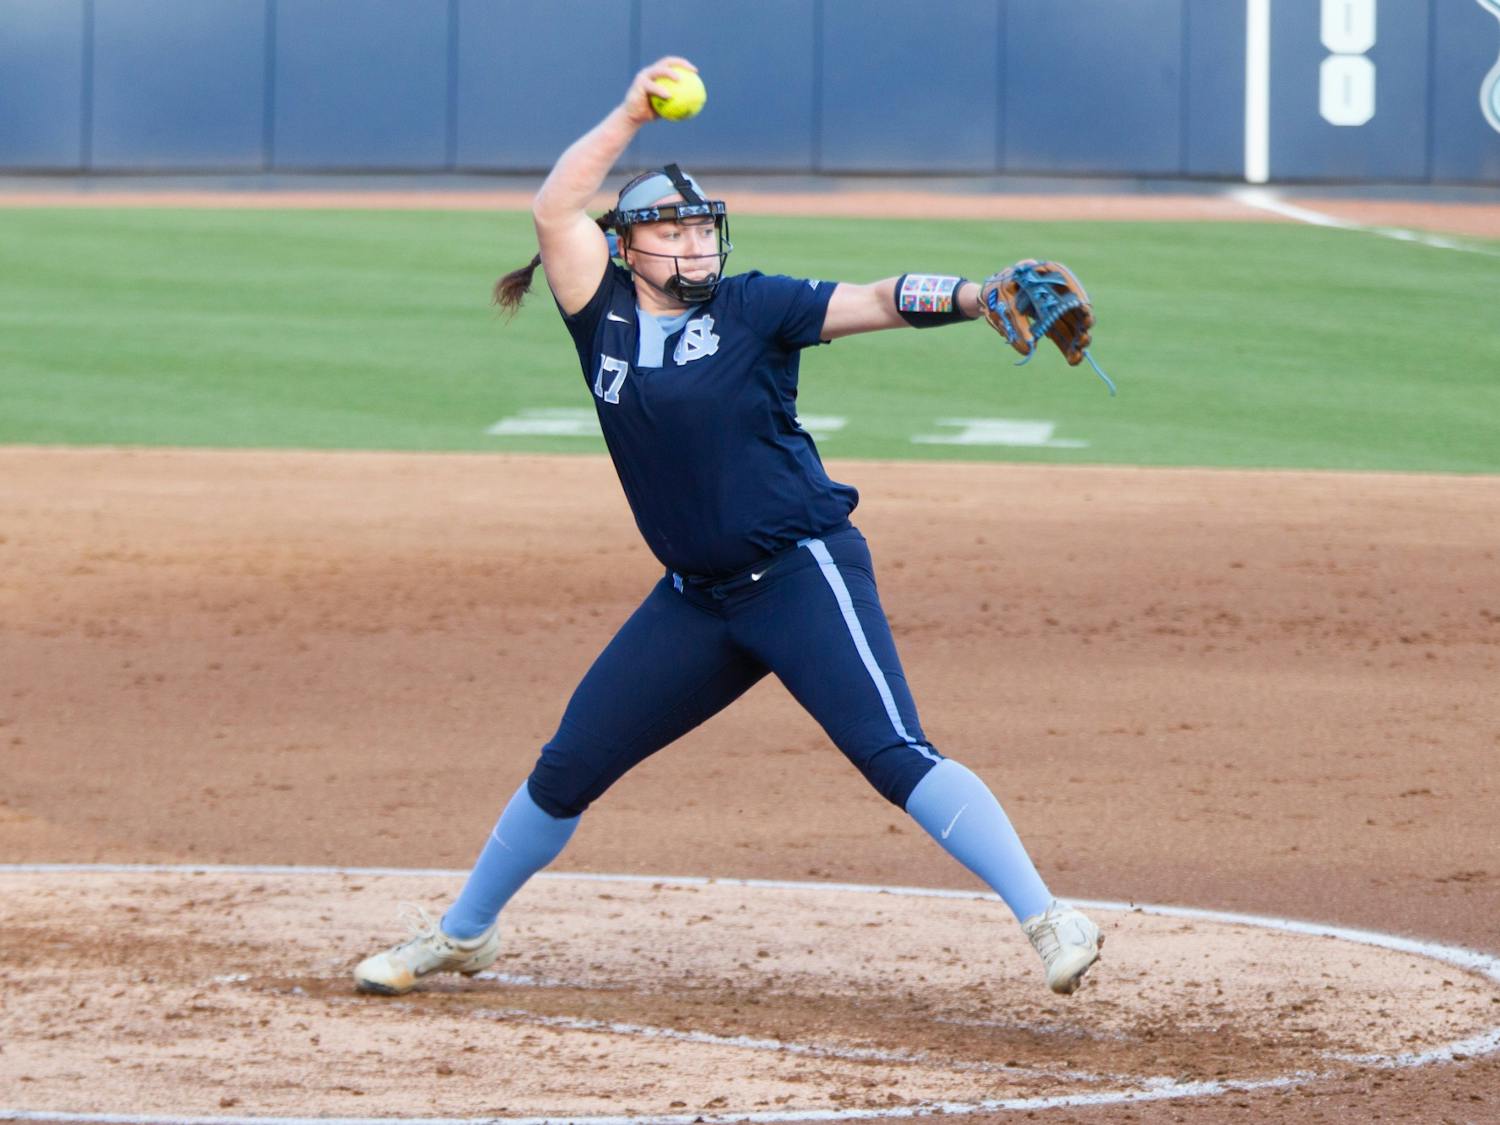 UNC freshman pitcher Carlie Myrtle (17) pitches during a home game against N.C. Central at Anderson Stadium on Wednesday, Apr. 20, 2022.